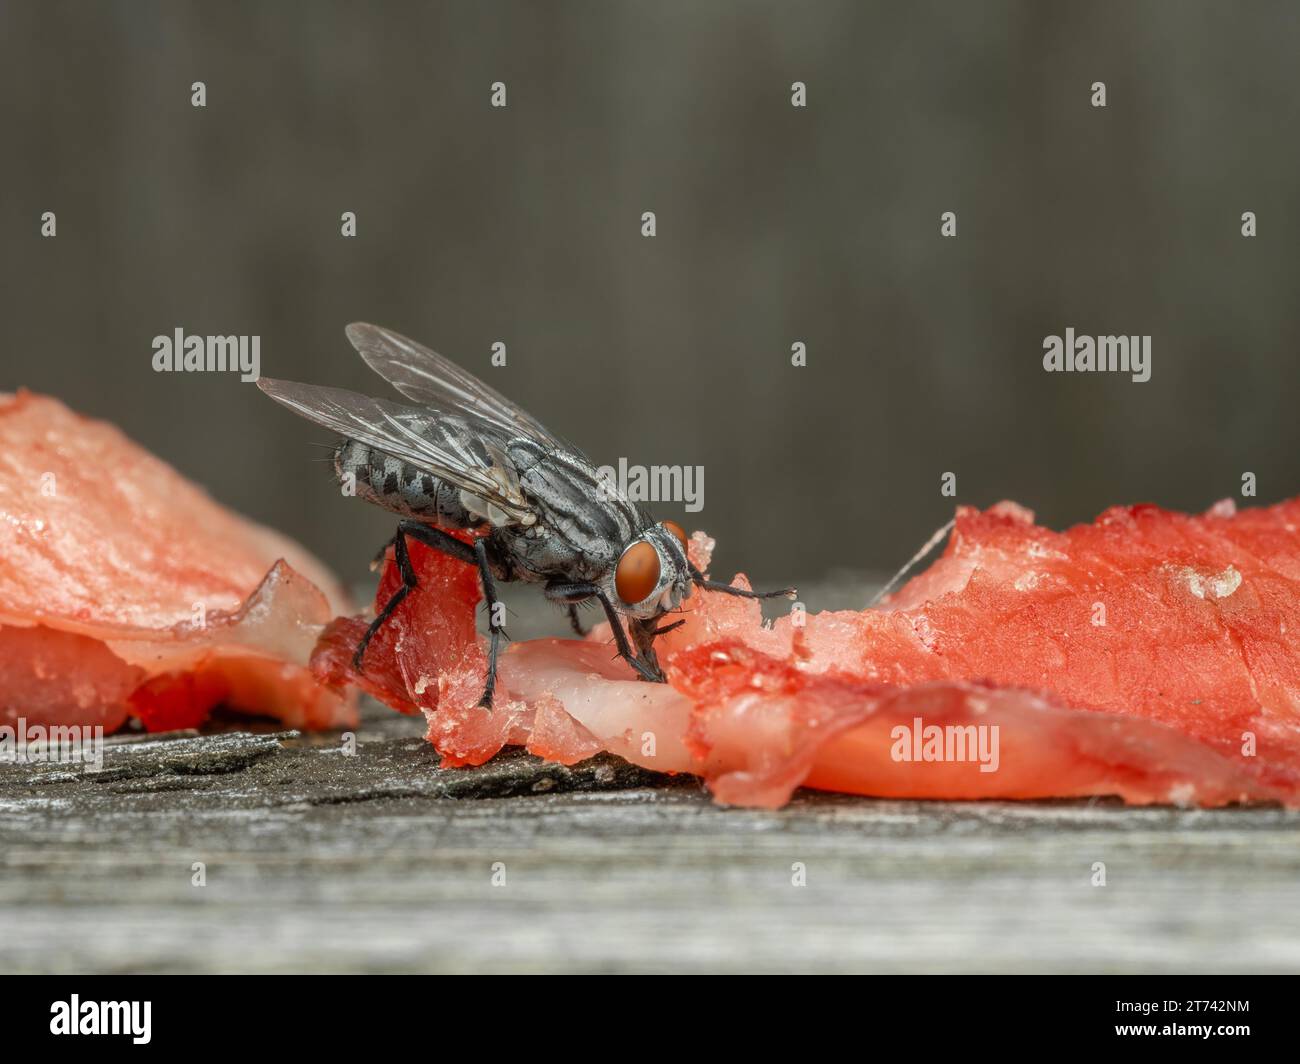 Side view of a flesh fly (Sarcophaga species), with bright red compound eyes, feeding on scraps of salmon flesh Stock Photo